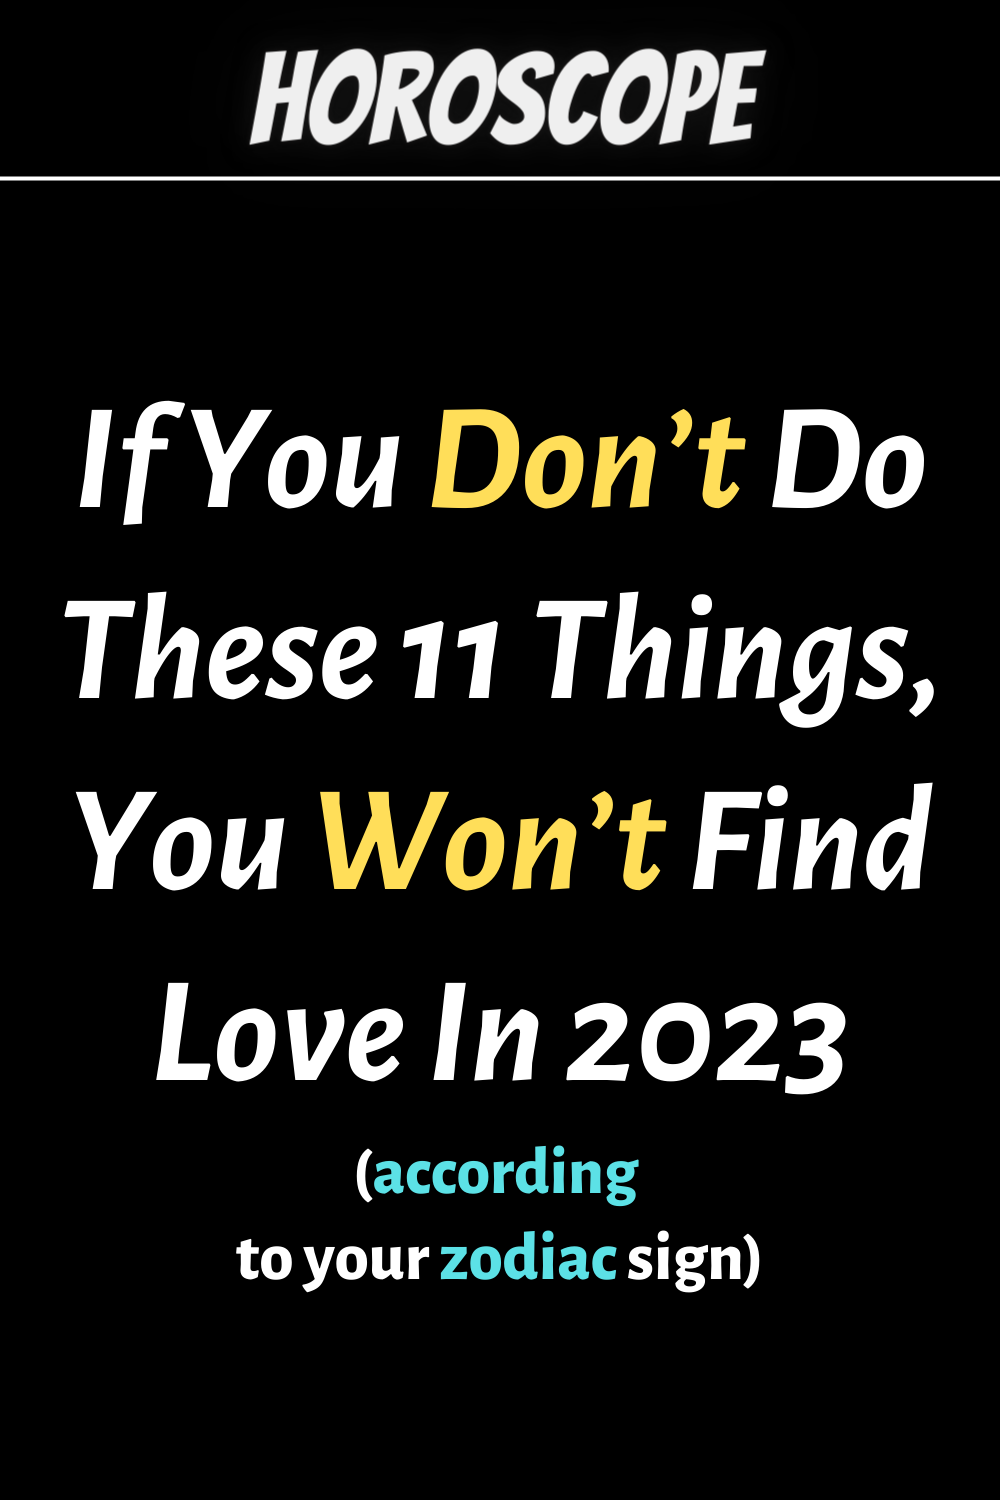 If You Don’t Do These 11 Things, You Won’t Find Love In 2023